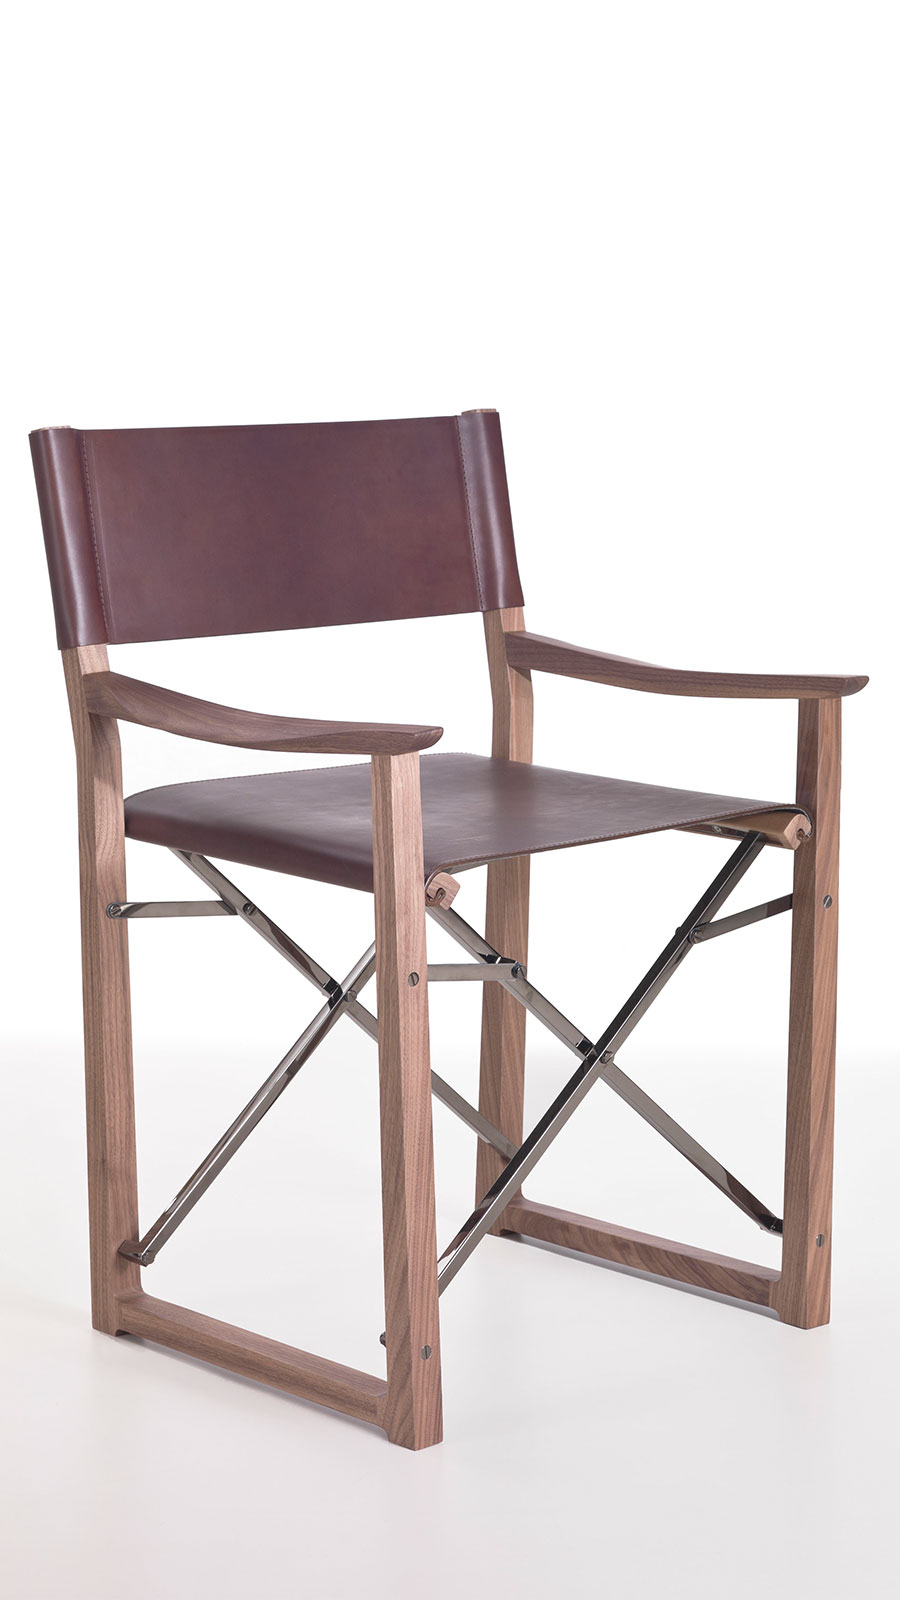 Clip Folding Director Chair In Leather, Folding Wood Director Chairs